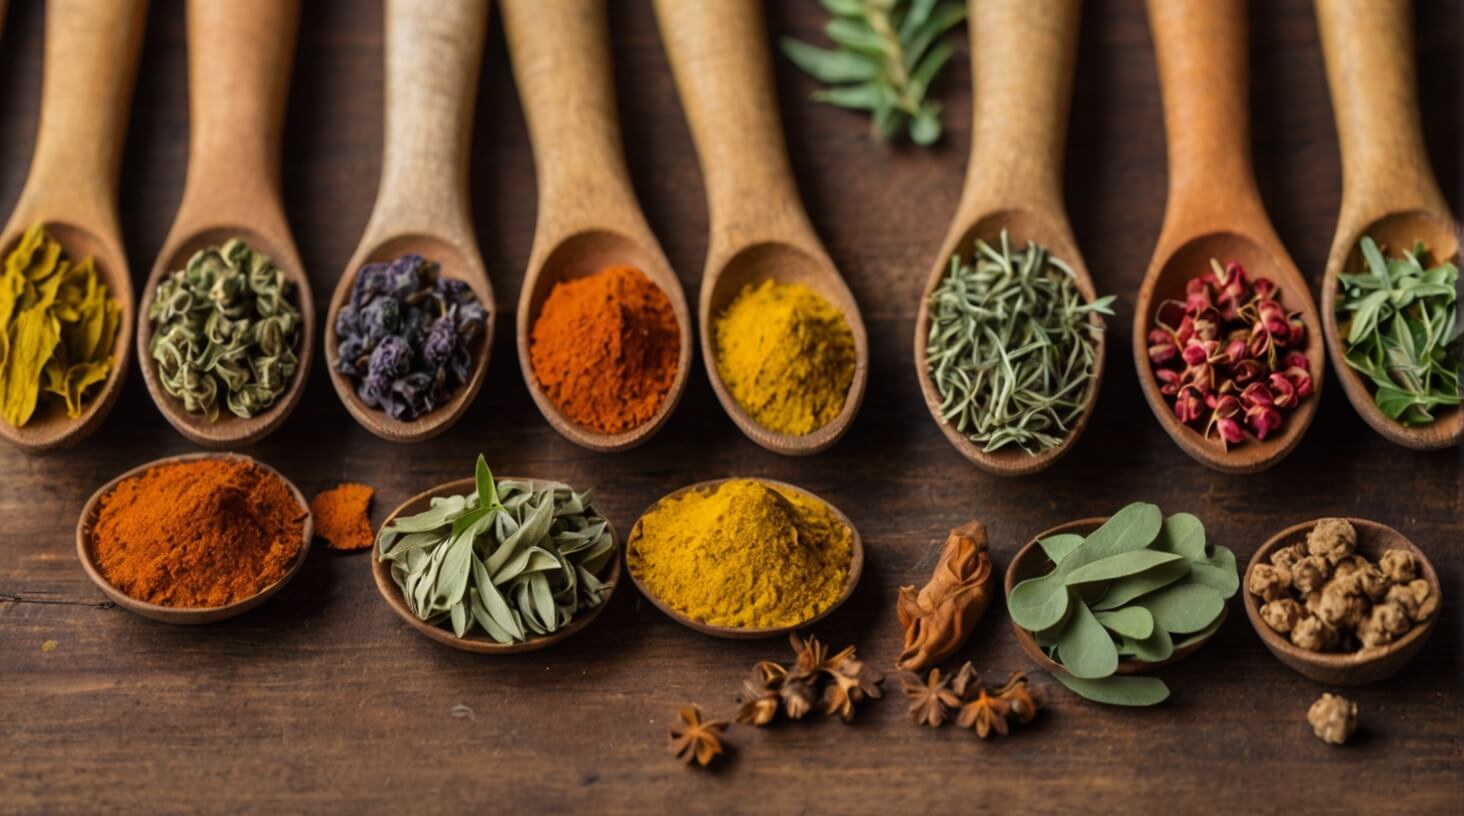 Image of various herbs and spices symbolizing the concept of balancing immunity through diverse herbal remedies.